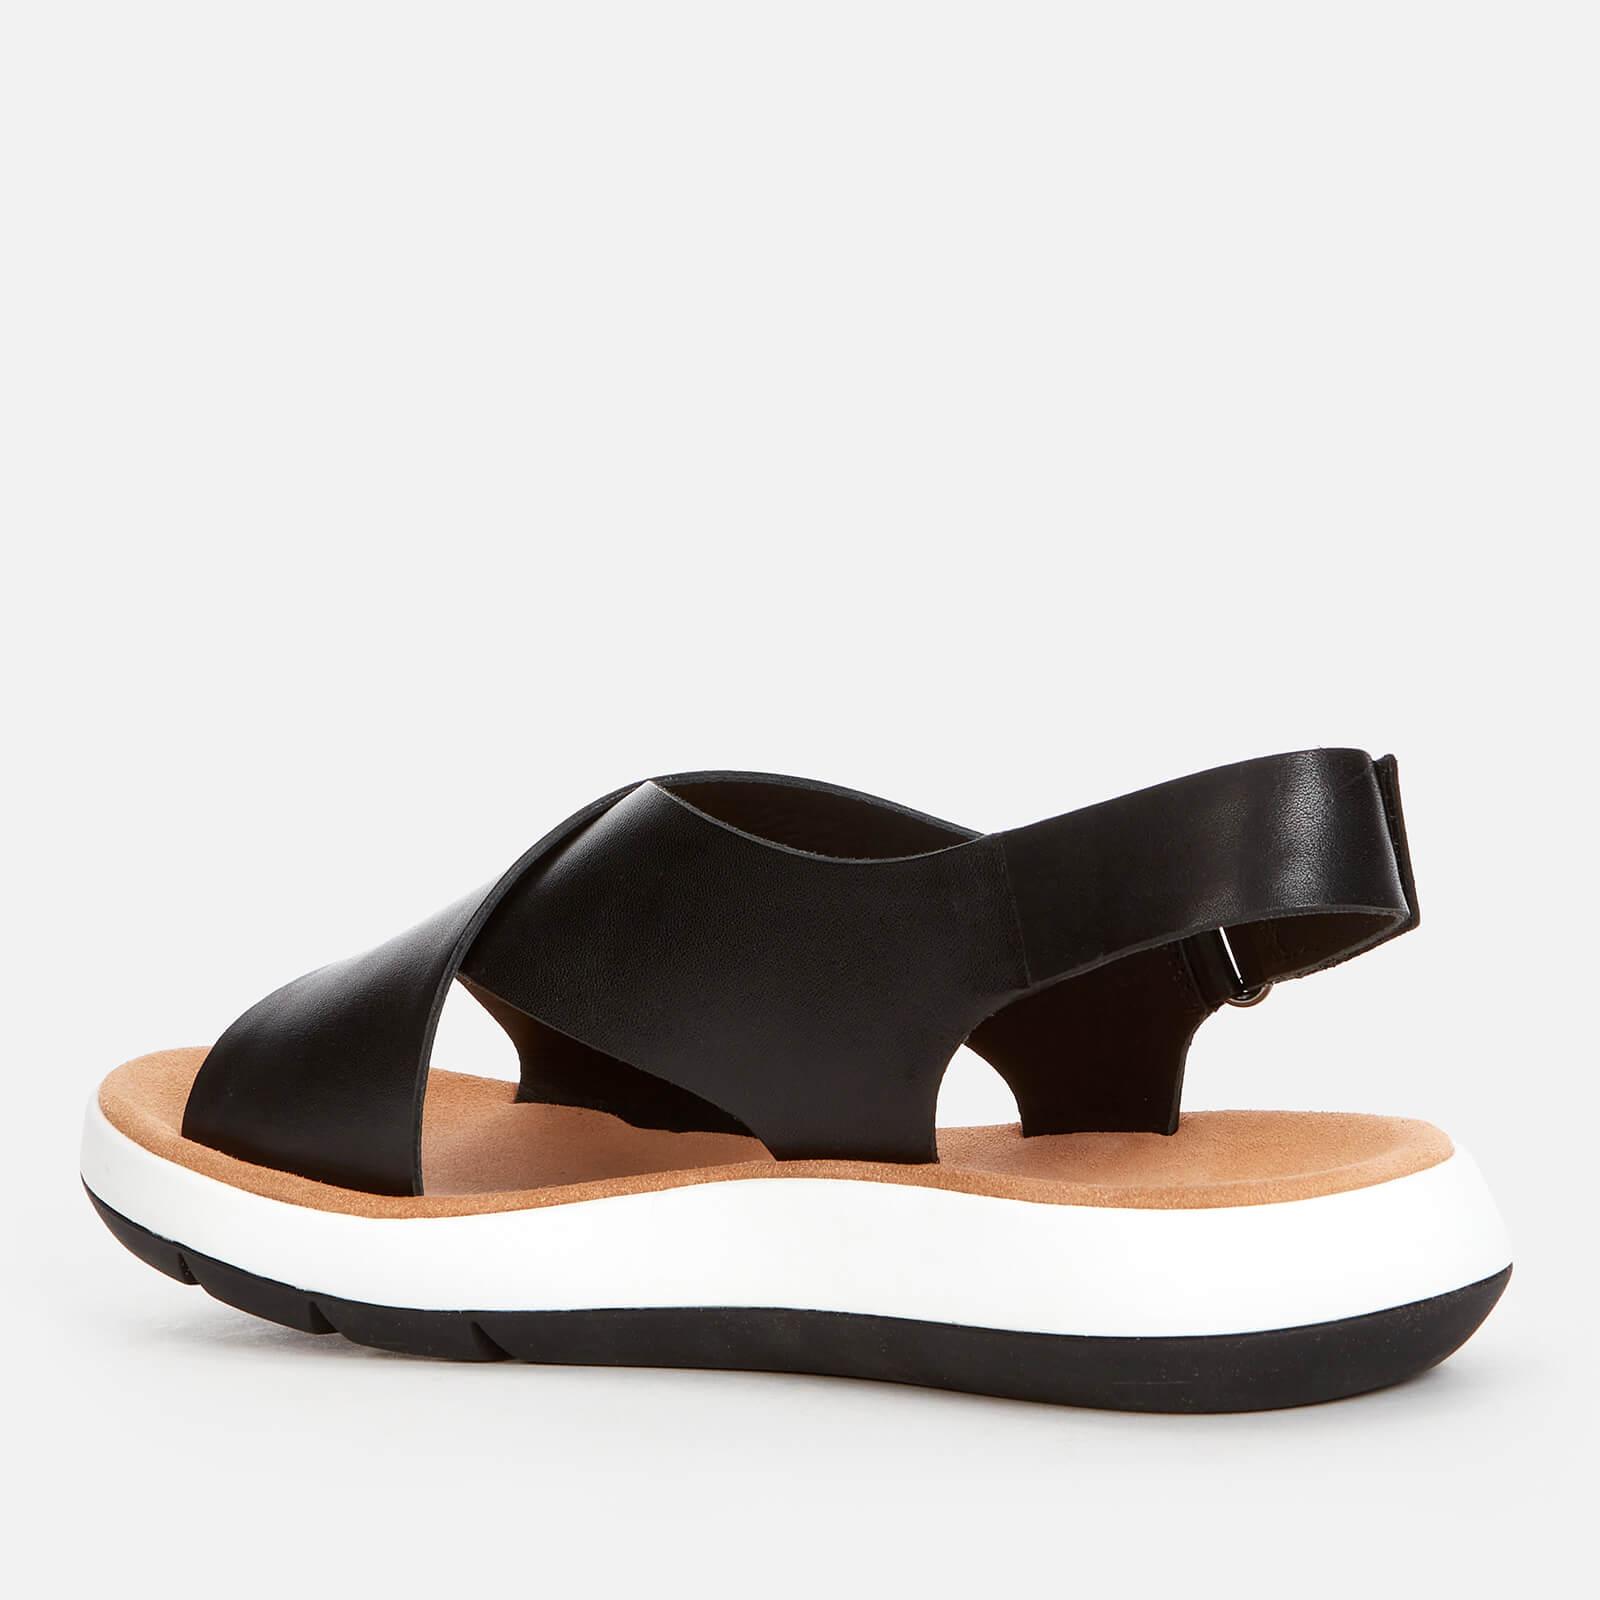 Clarks Jemsa Cross Leather Sandals in Brown | Lyst